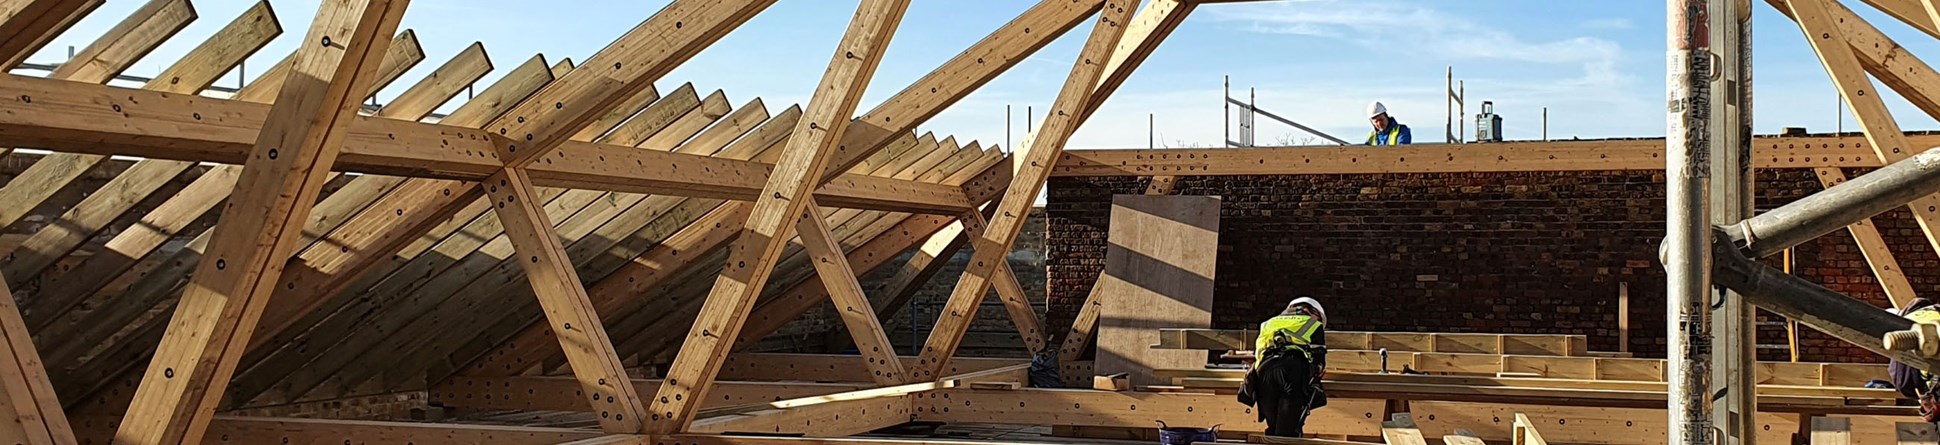 New roof timbers constructed into a frame structure